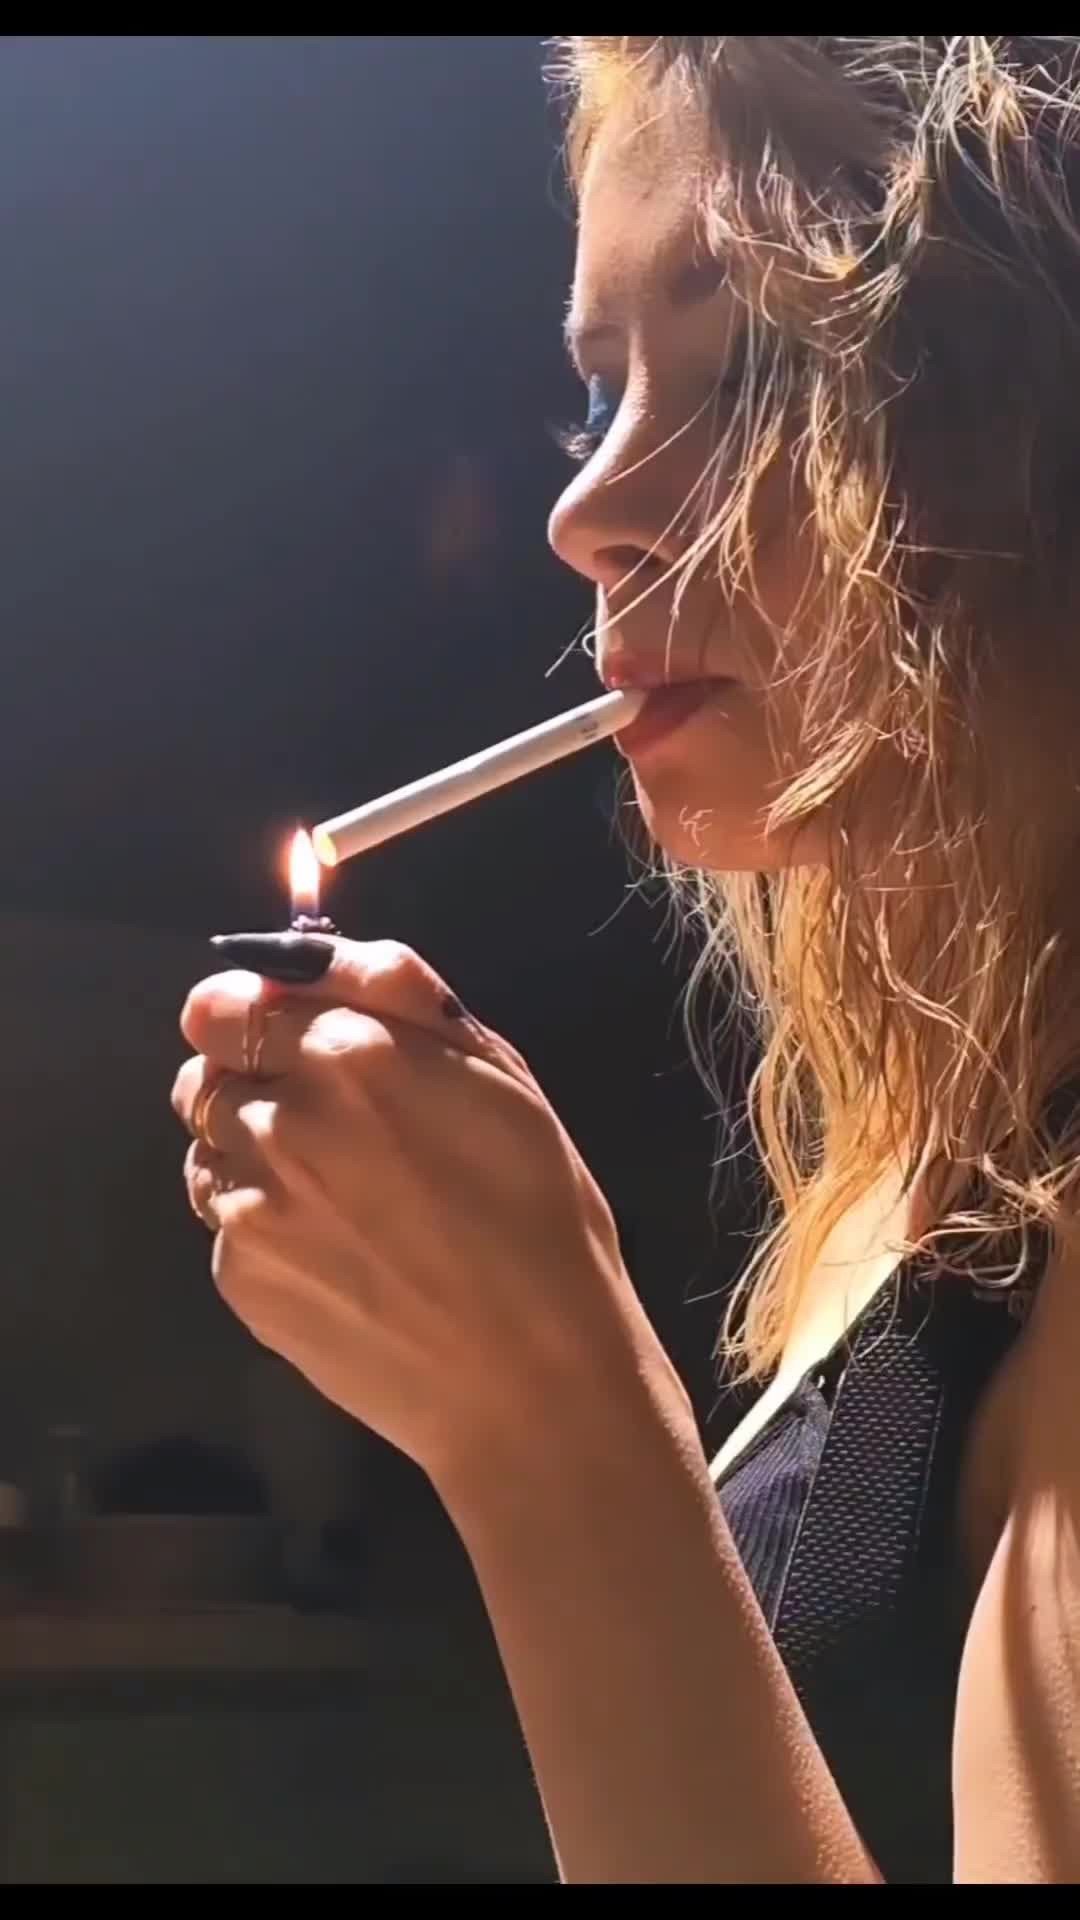 Watch the Video by LOVEMYWORLD3 with the username @LOVEMYWORLD3, who is a verified user, posted on March 10, 2024. The post is about the topic Smoking women.